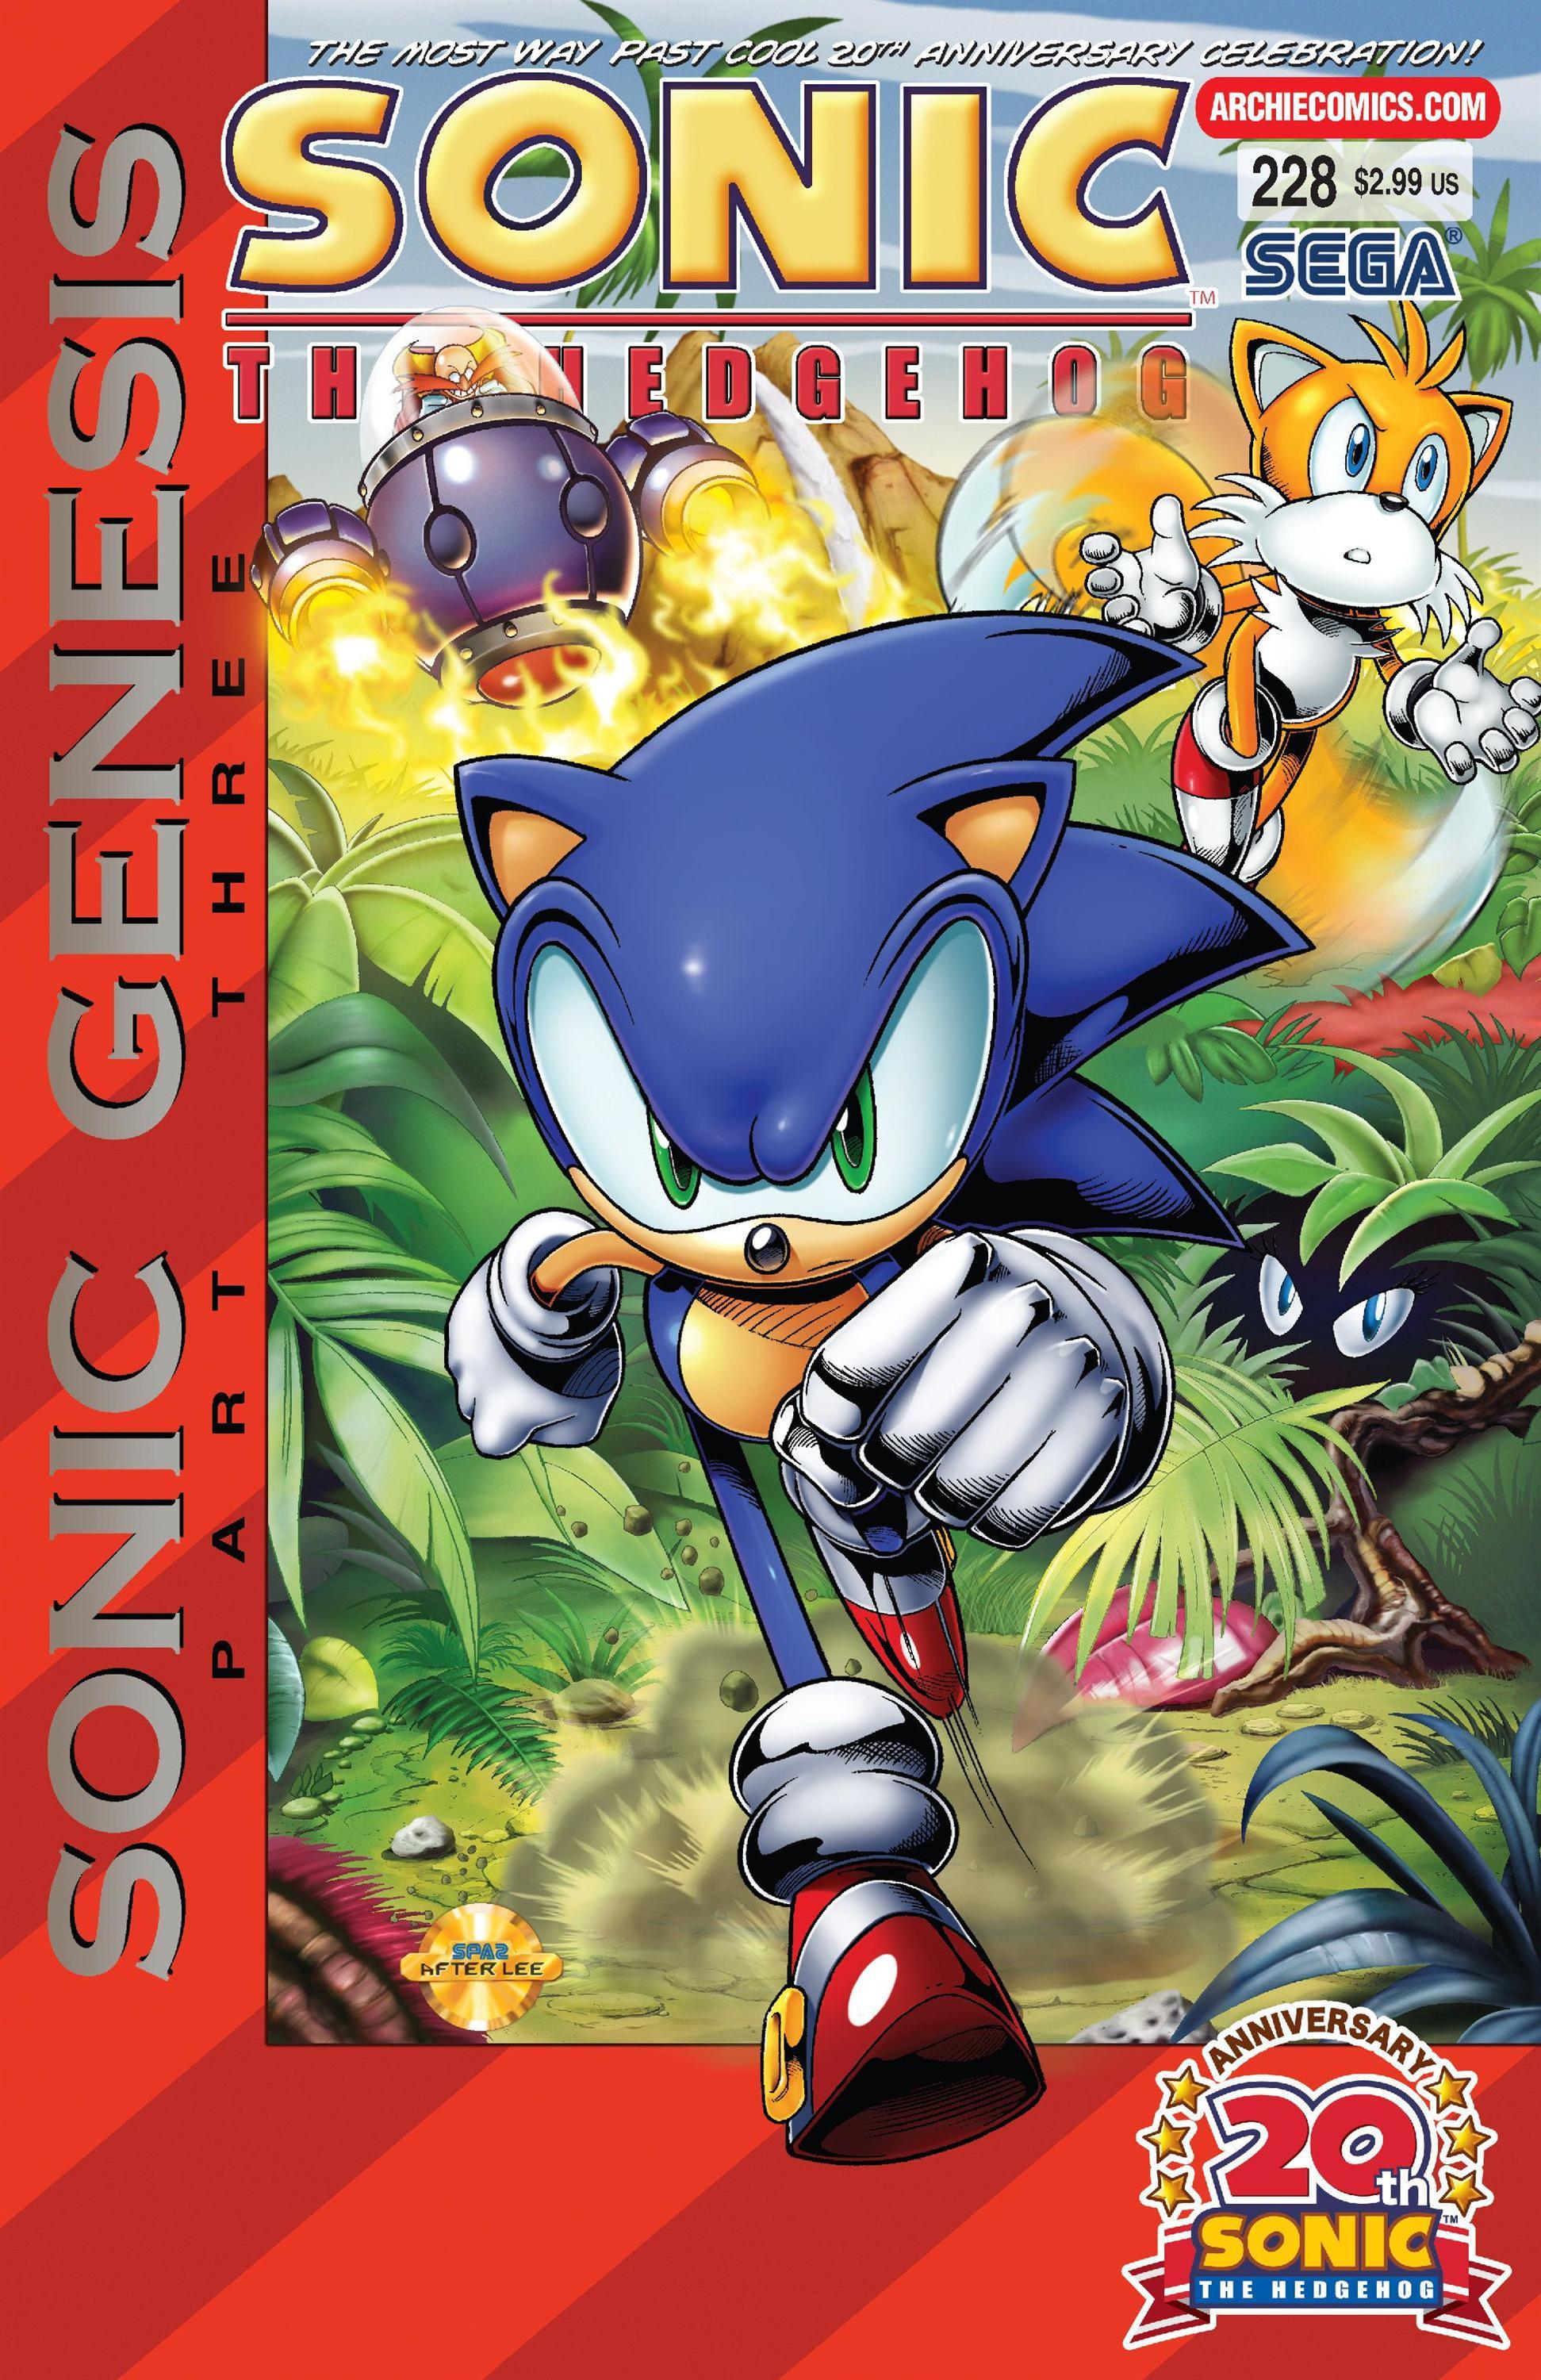 Archie Sonic The Hedgehog Issue 228 Sonic News Network Fandom